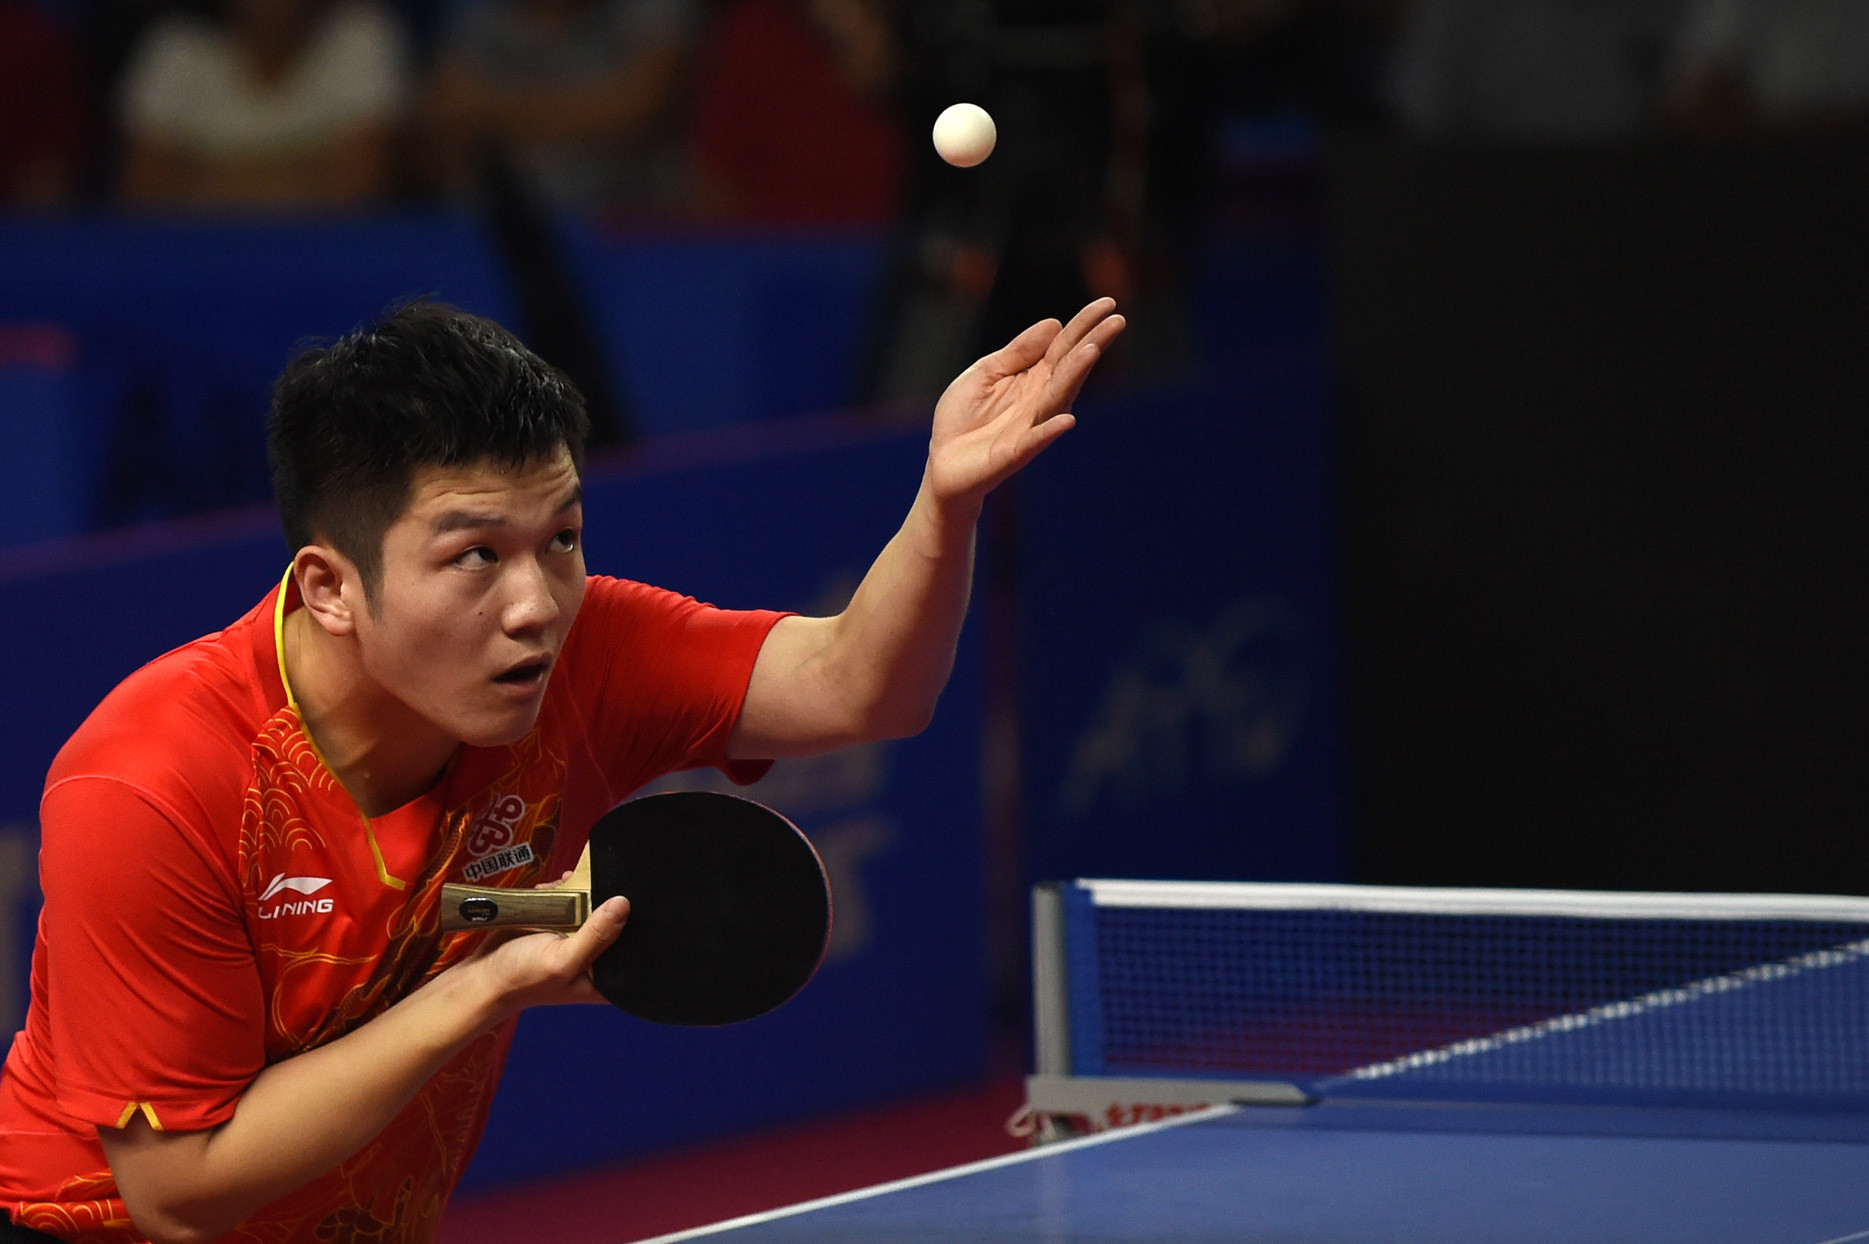 Fan Zhendong will be targeting Hungarian Open success ©Getty Images